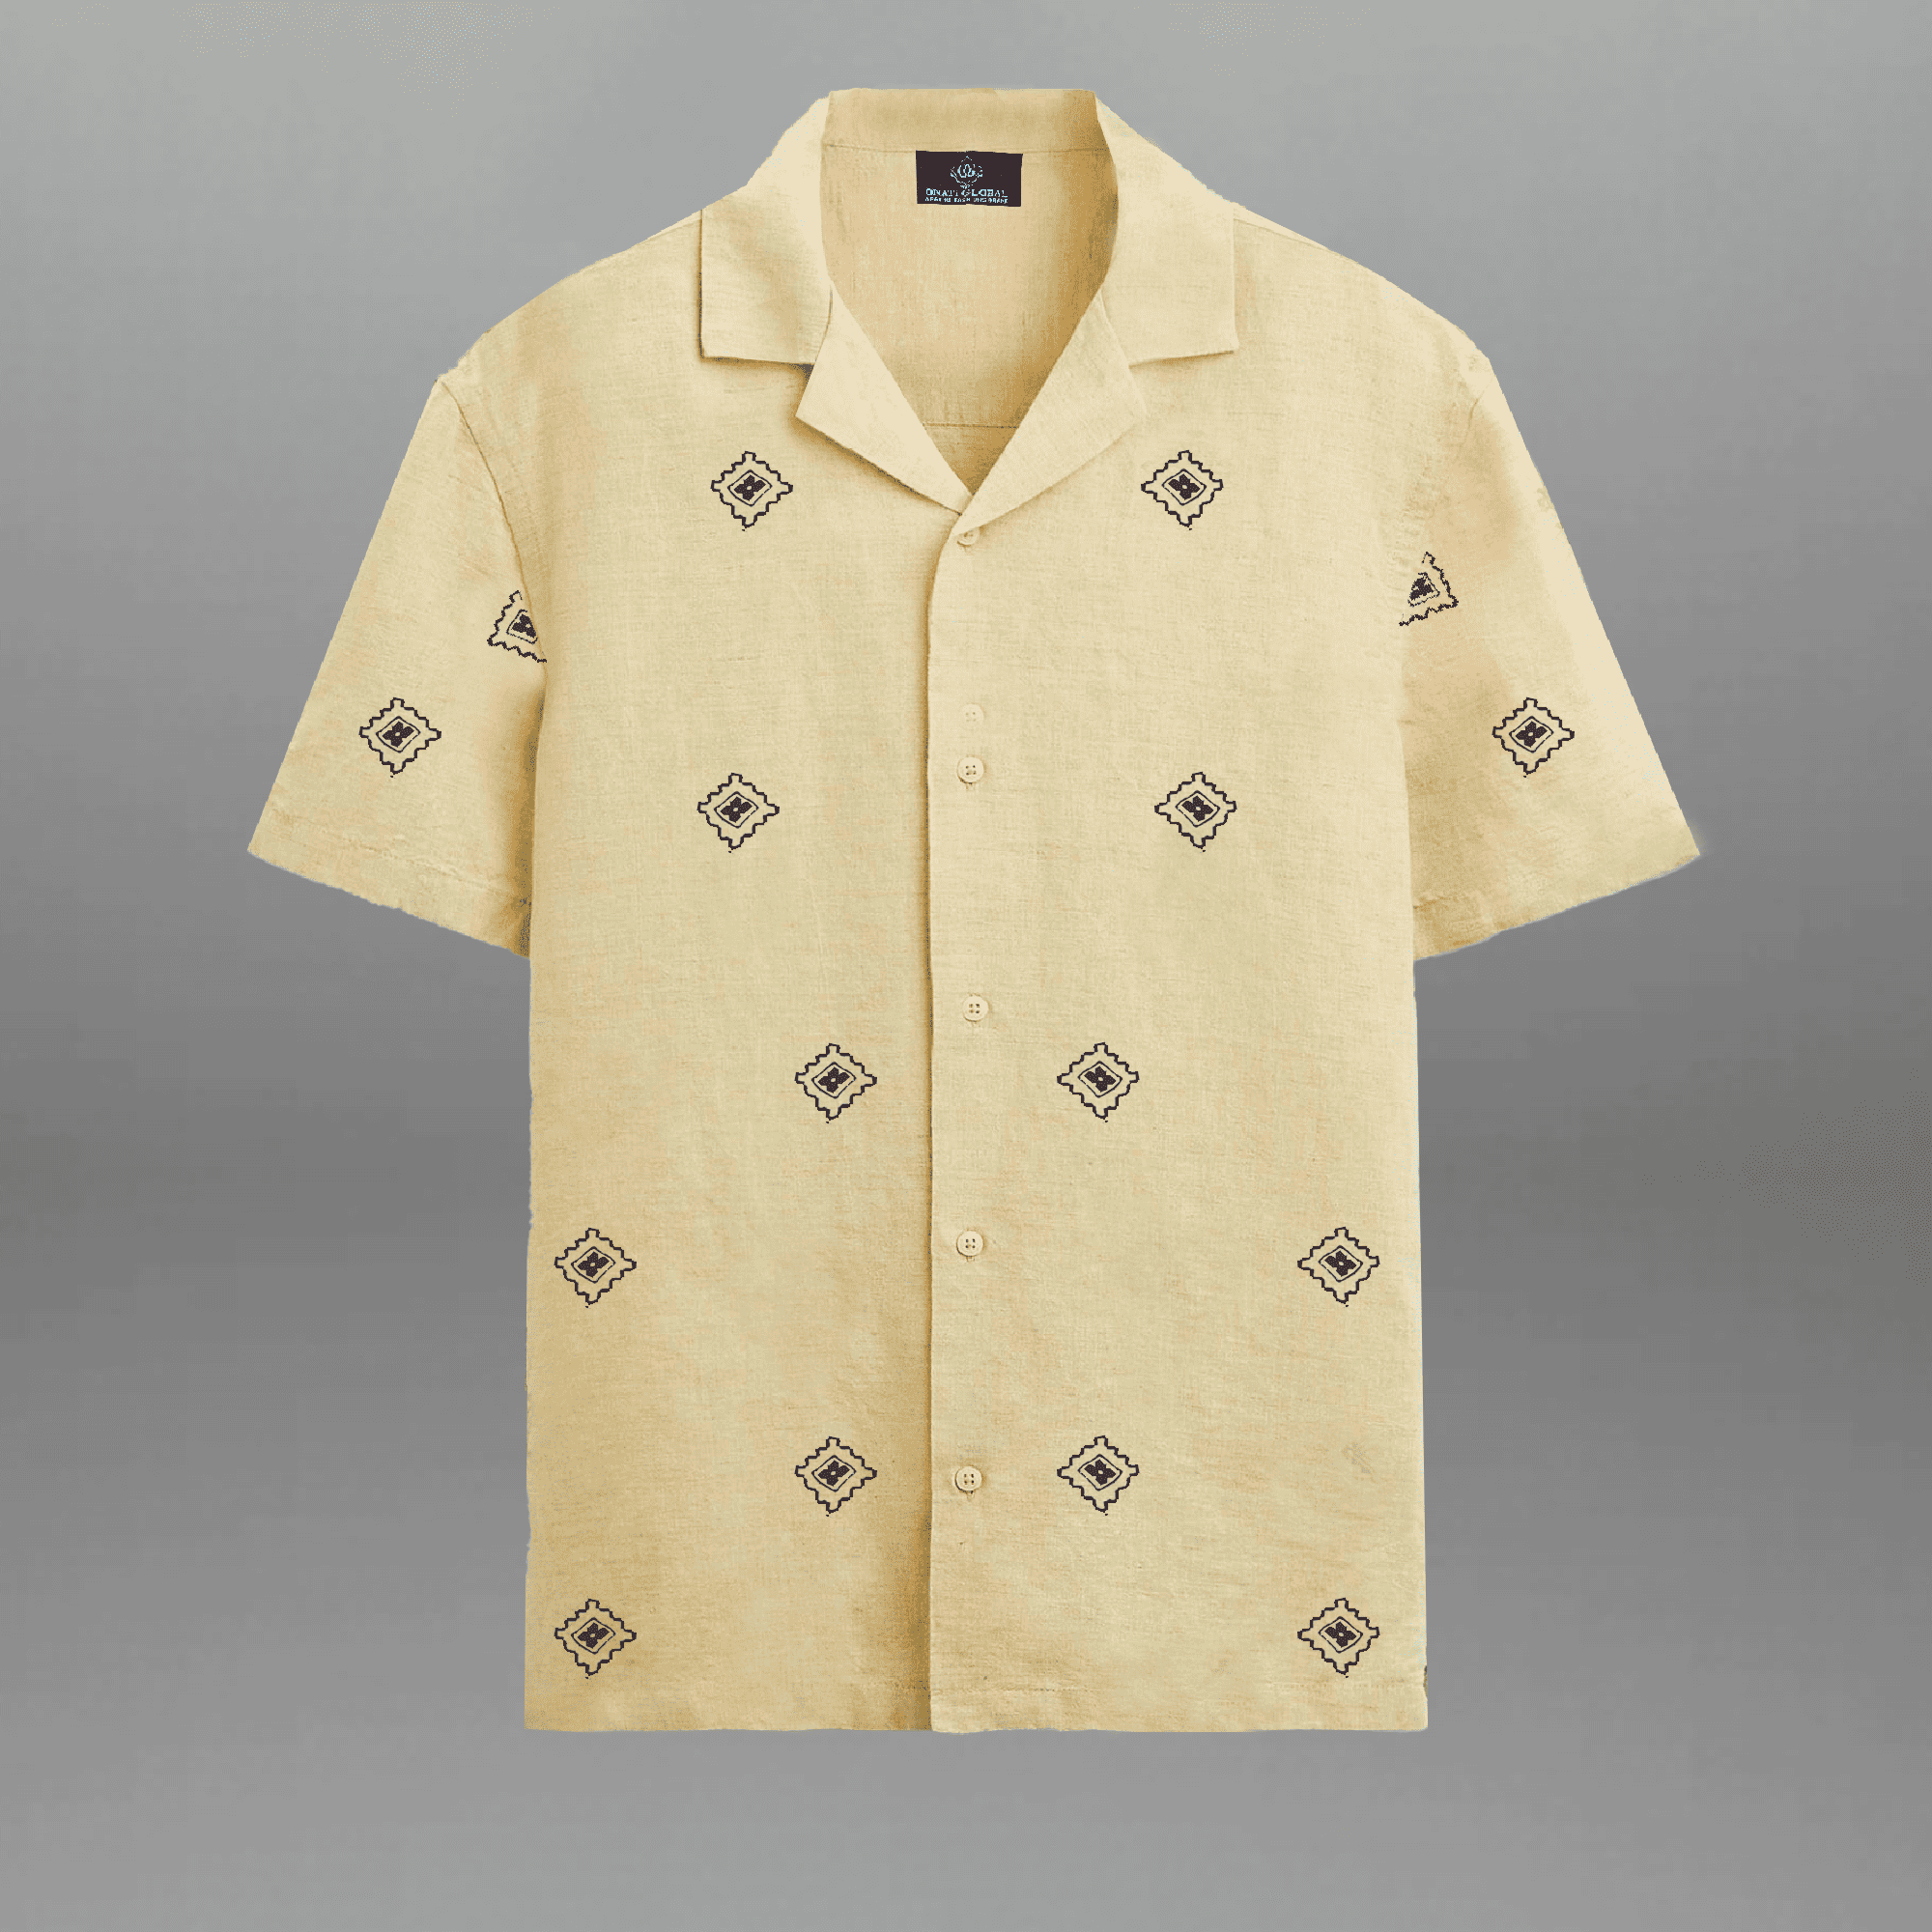 Men's Light Yellow Camp Collar Shirt with Black Embroidery-RMS048